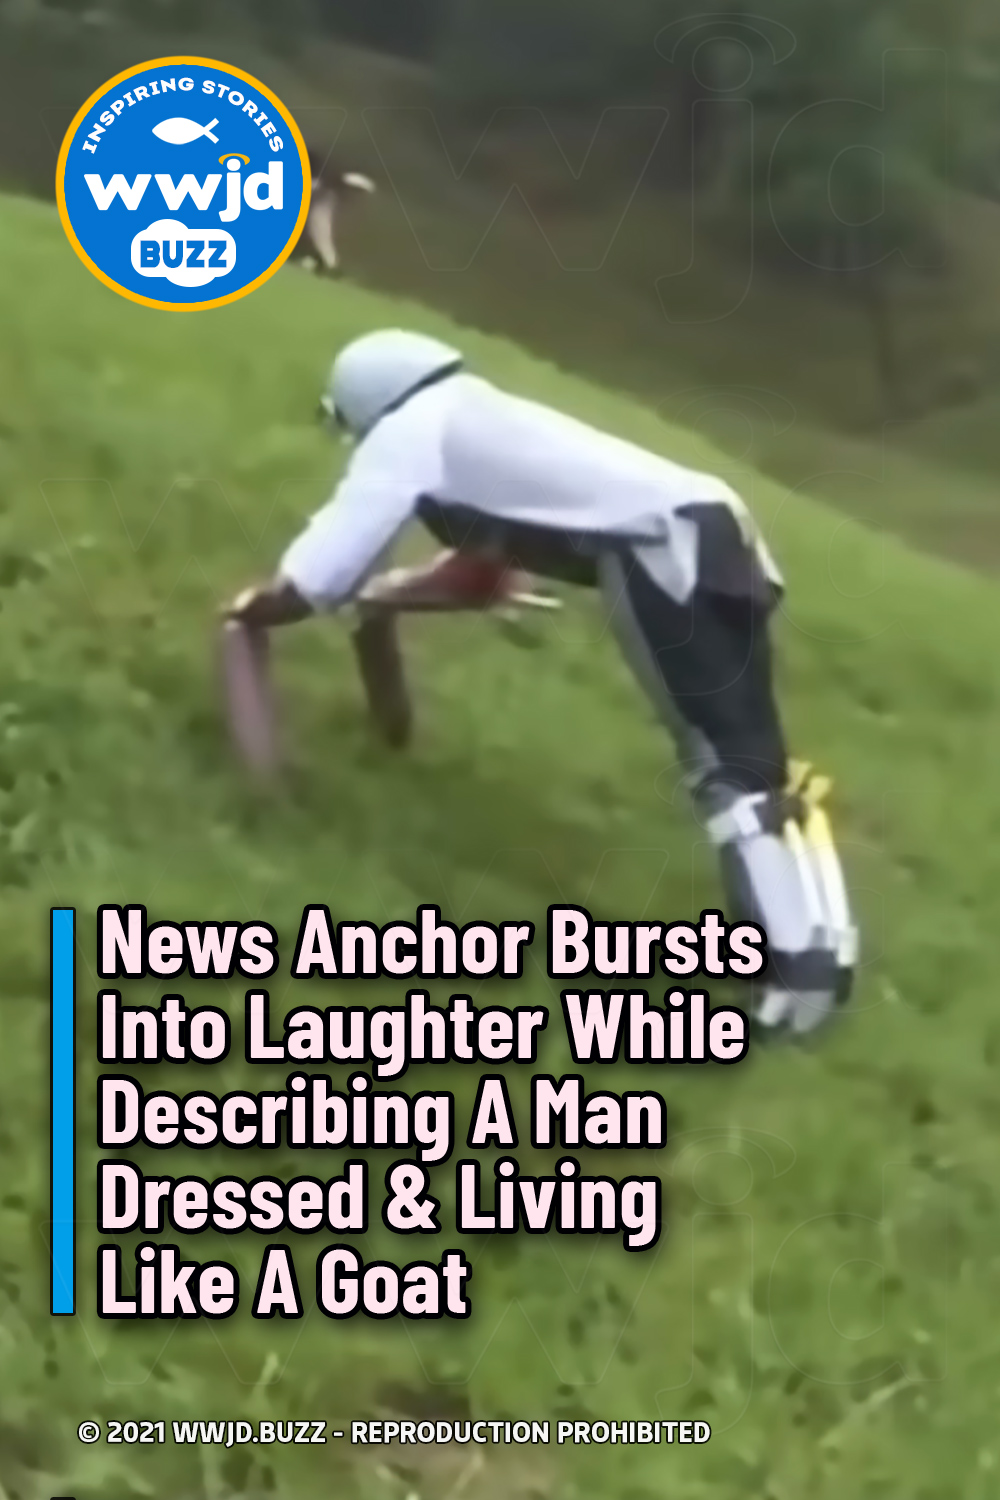 News Anchor Bursts Into Laughter While Describing A Man Dressed & Living Like A Goat